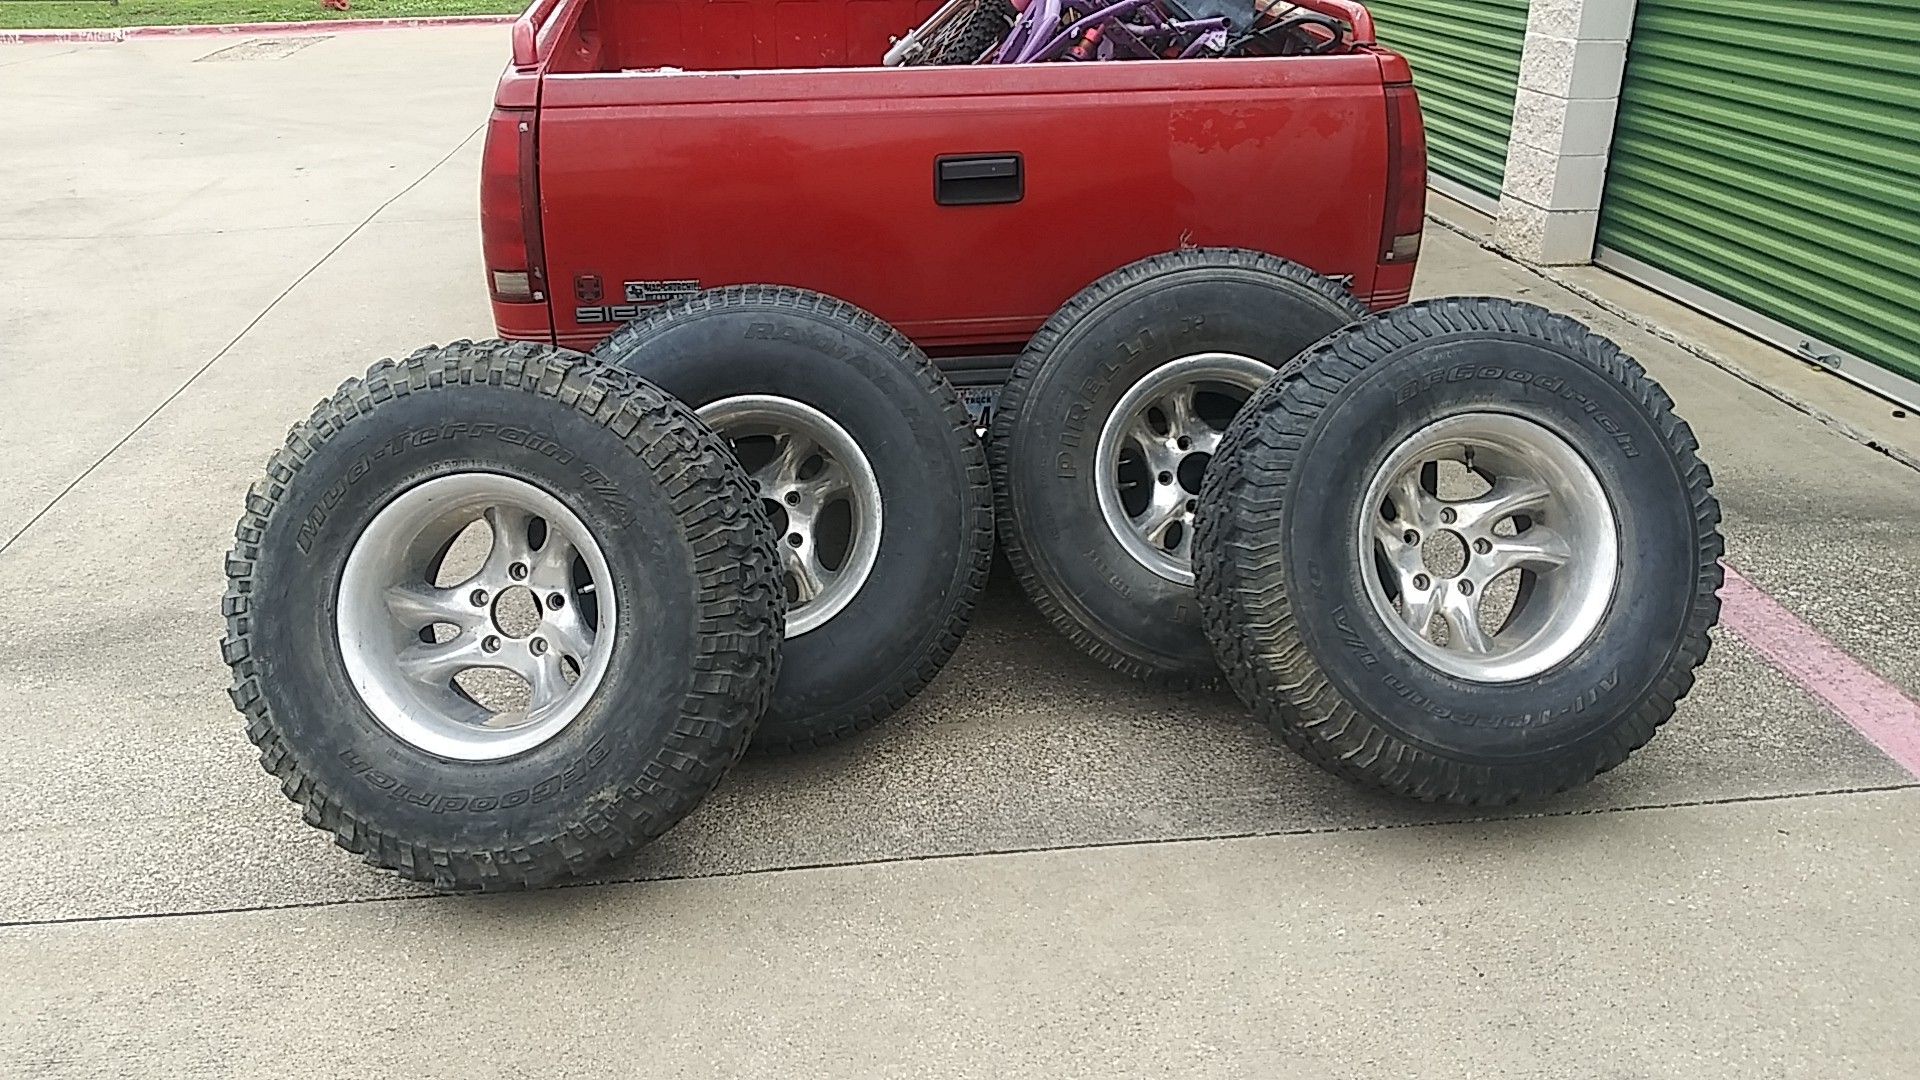 Tires 33 x 12.5 15 and wheels 5x5 GM